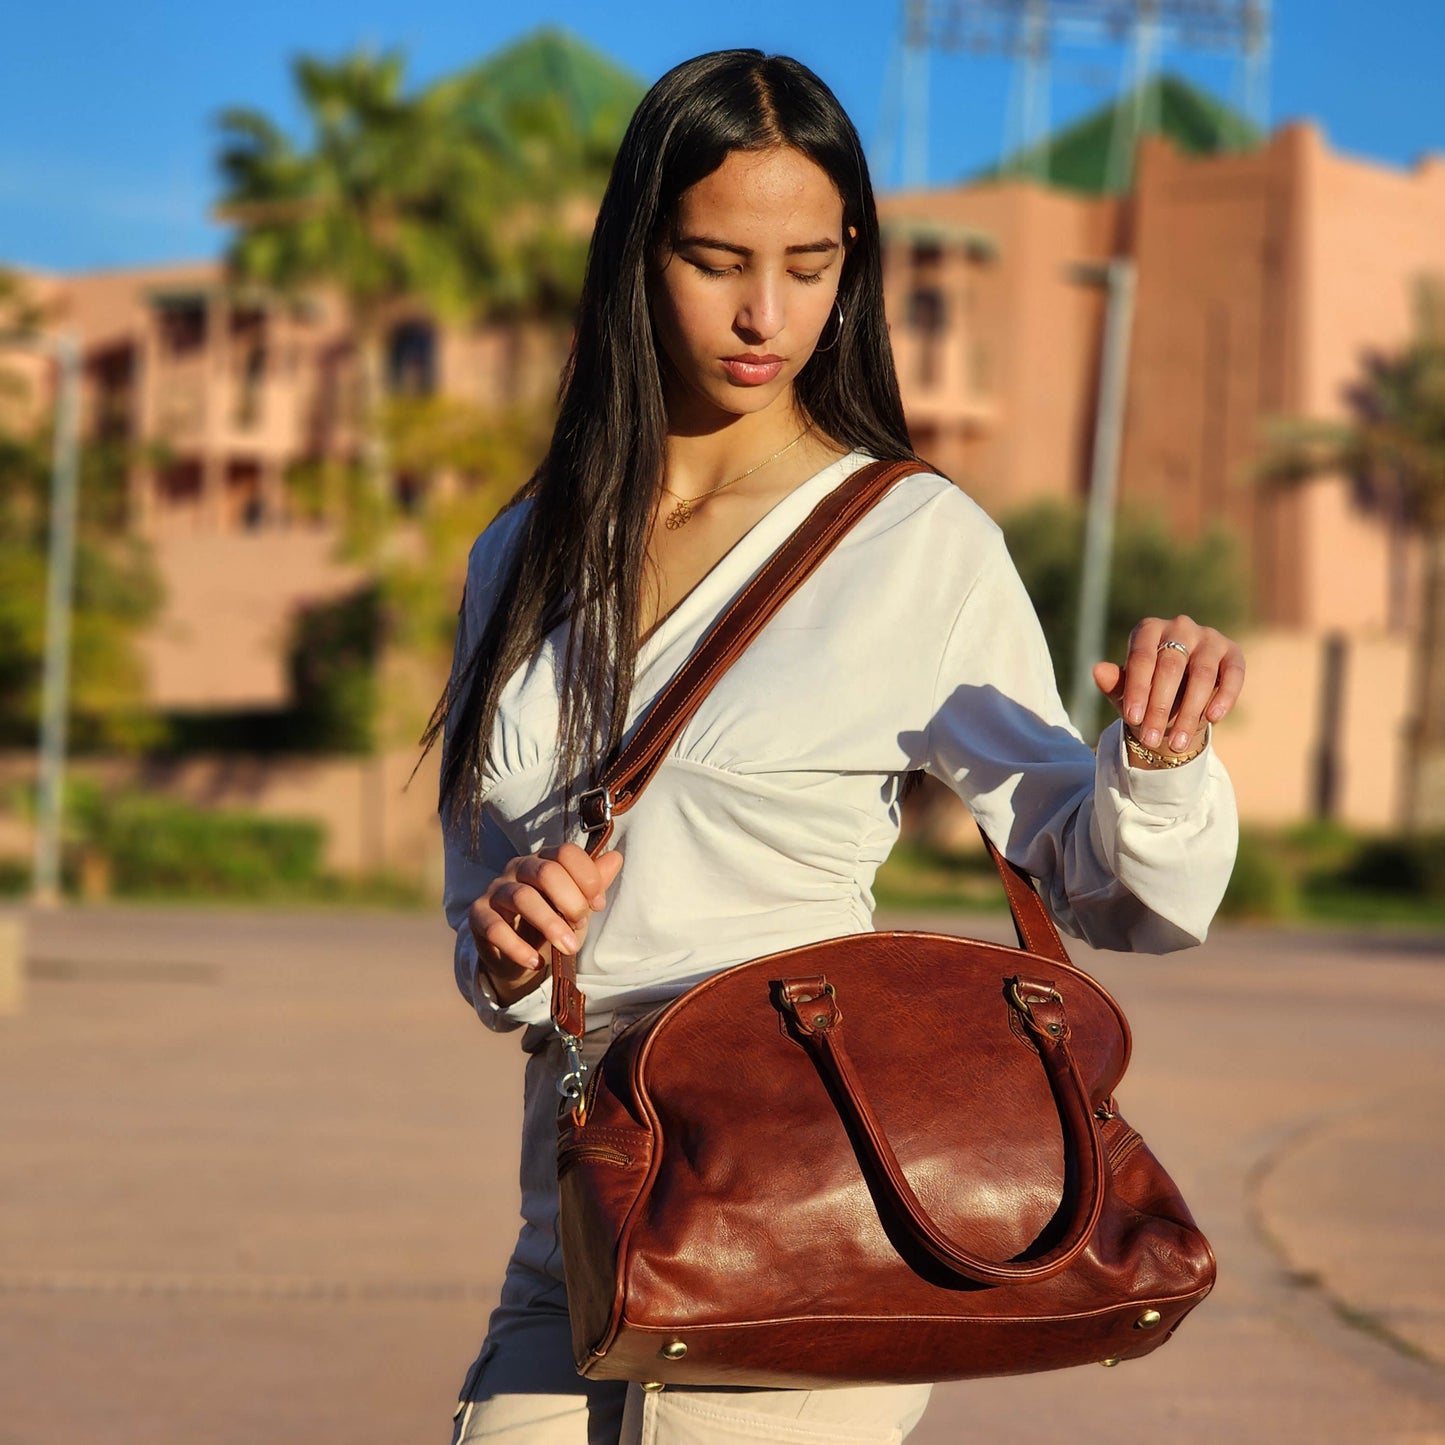 Women's Chic Leather Duffel: Ideal for Weekends